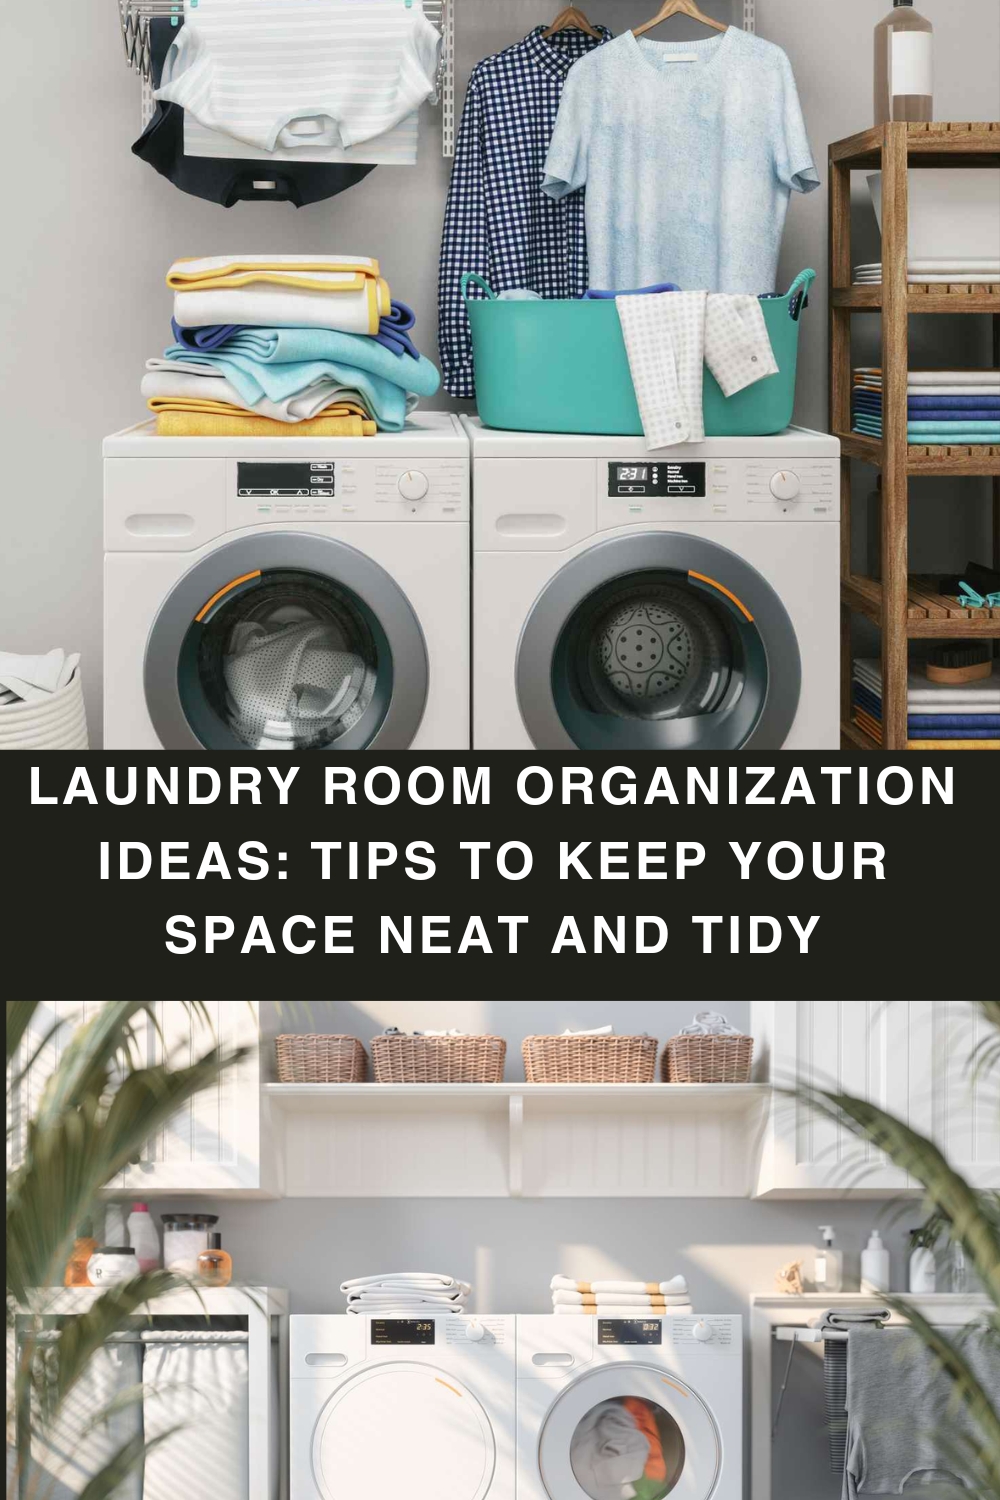 Laundry Room Organization Ideas: Tips to Keep Your Space Neat and Tidy pin